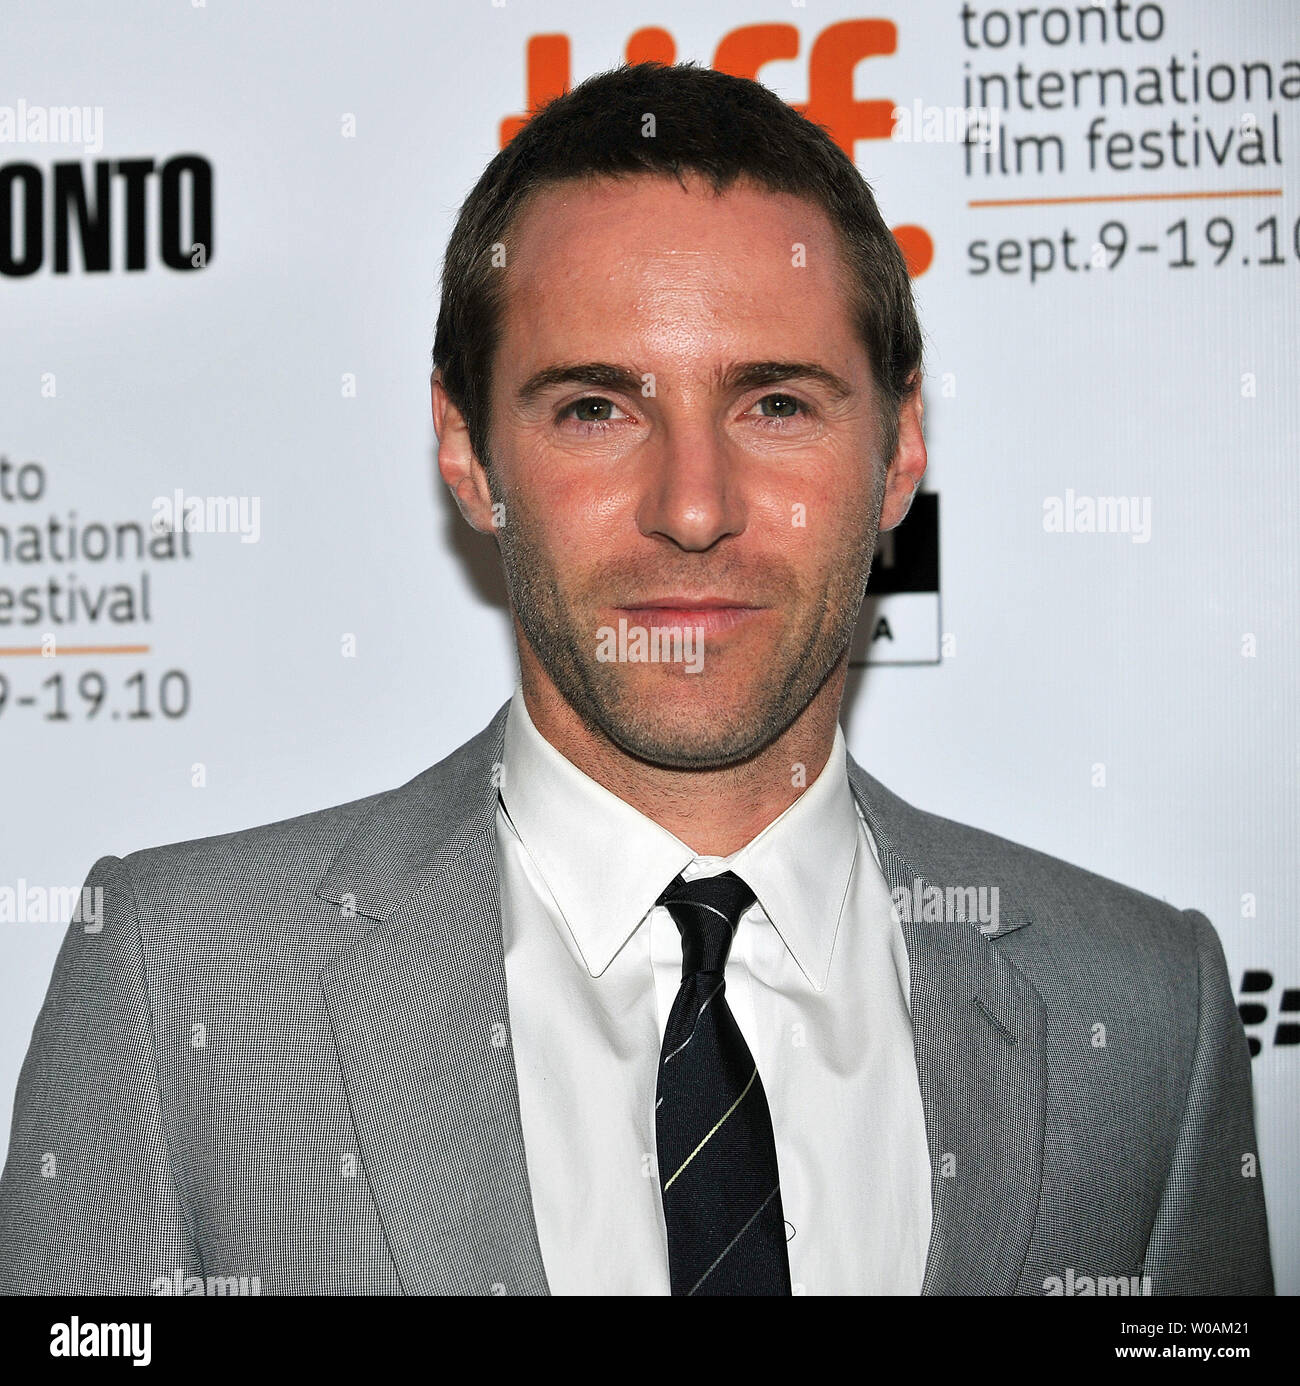 Actor Alessandro Nivola arrives for the world premiere gala of 'Janie Jones' at Roy Thomson Hall during the Toronto International Film Festival in Toronto, Canada on September 17, 2010. UPI/Christine Chew Stock Photo